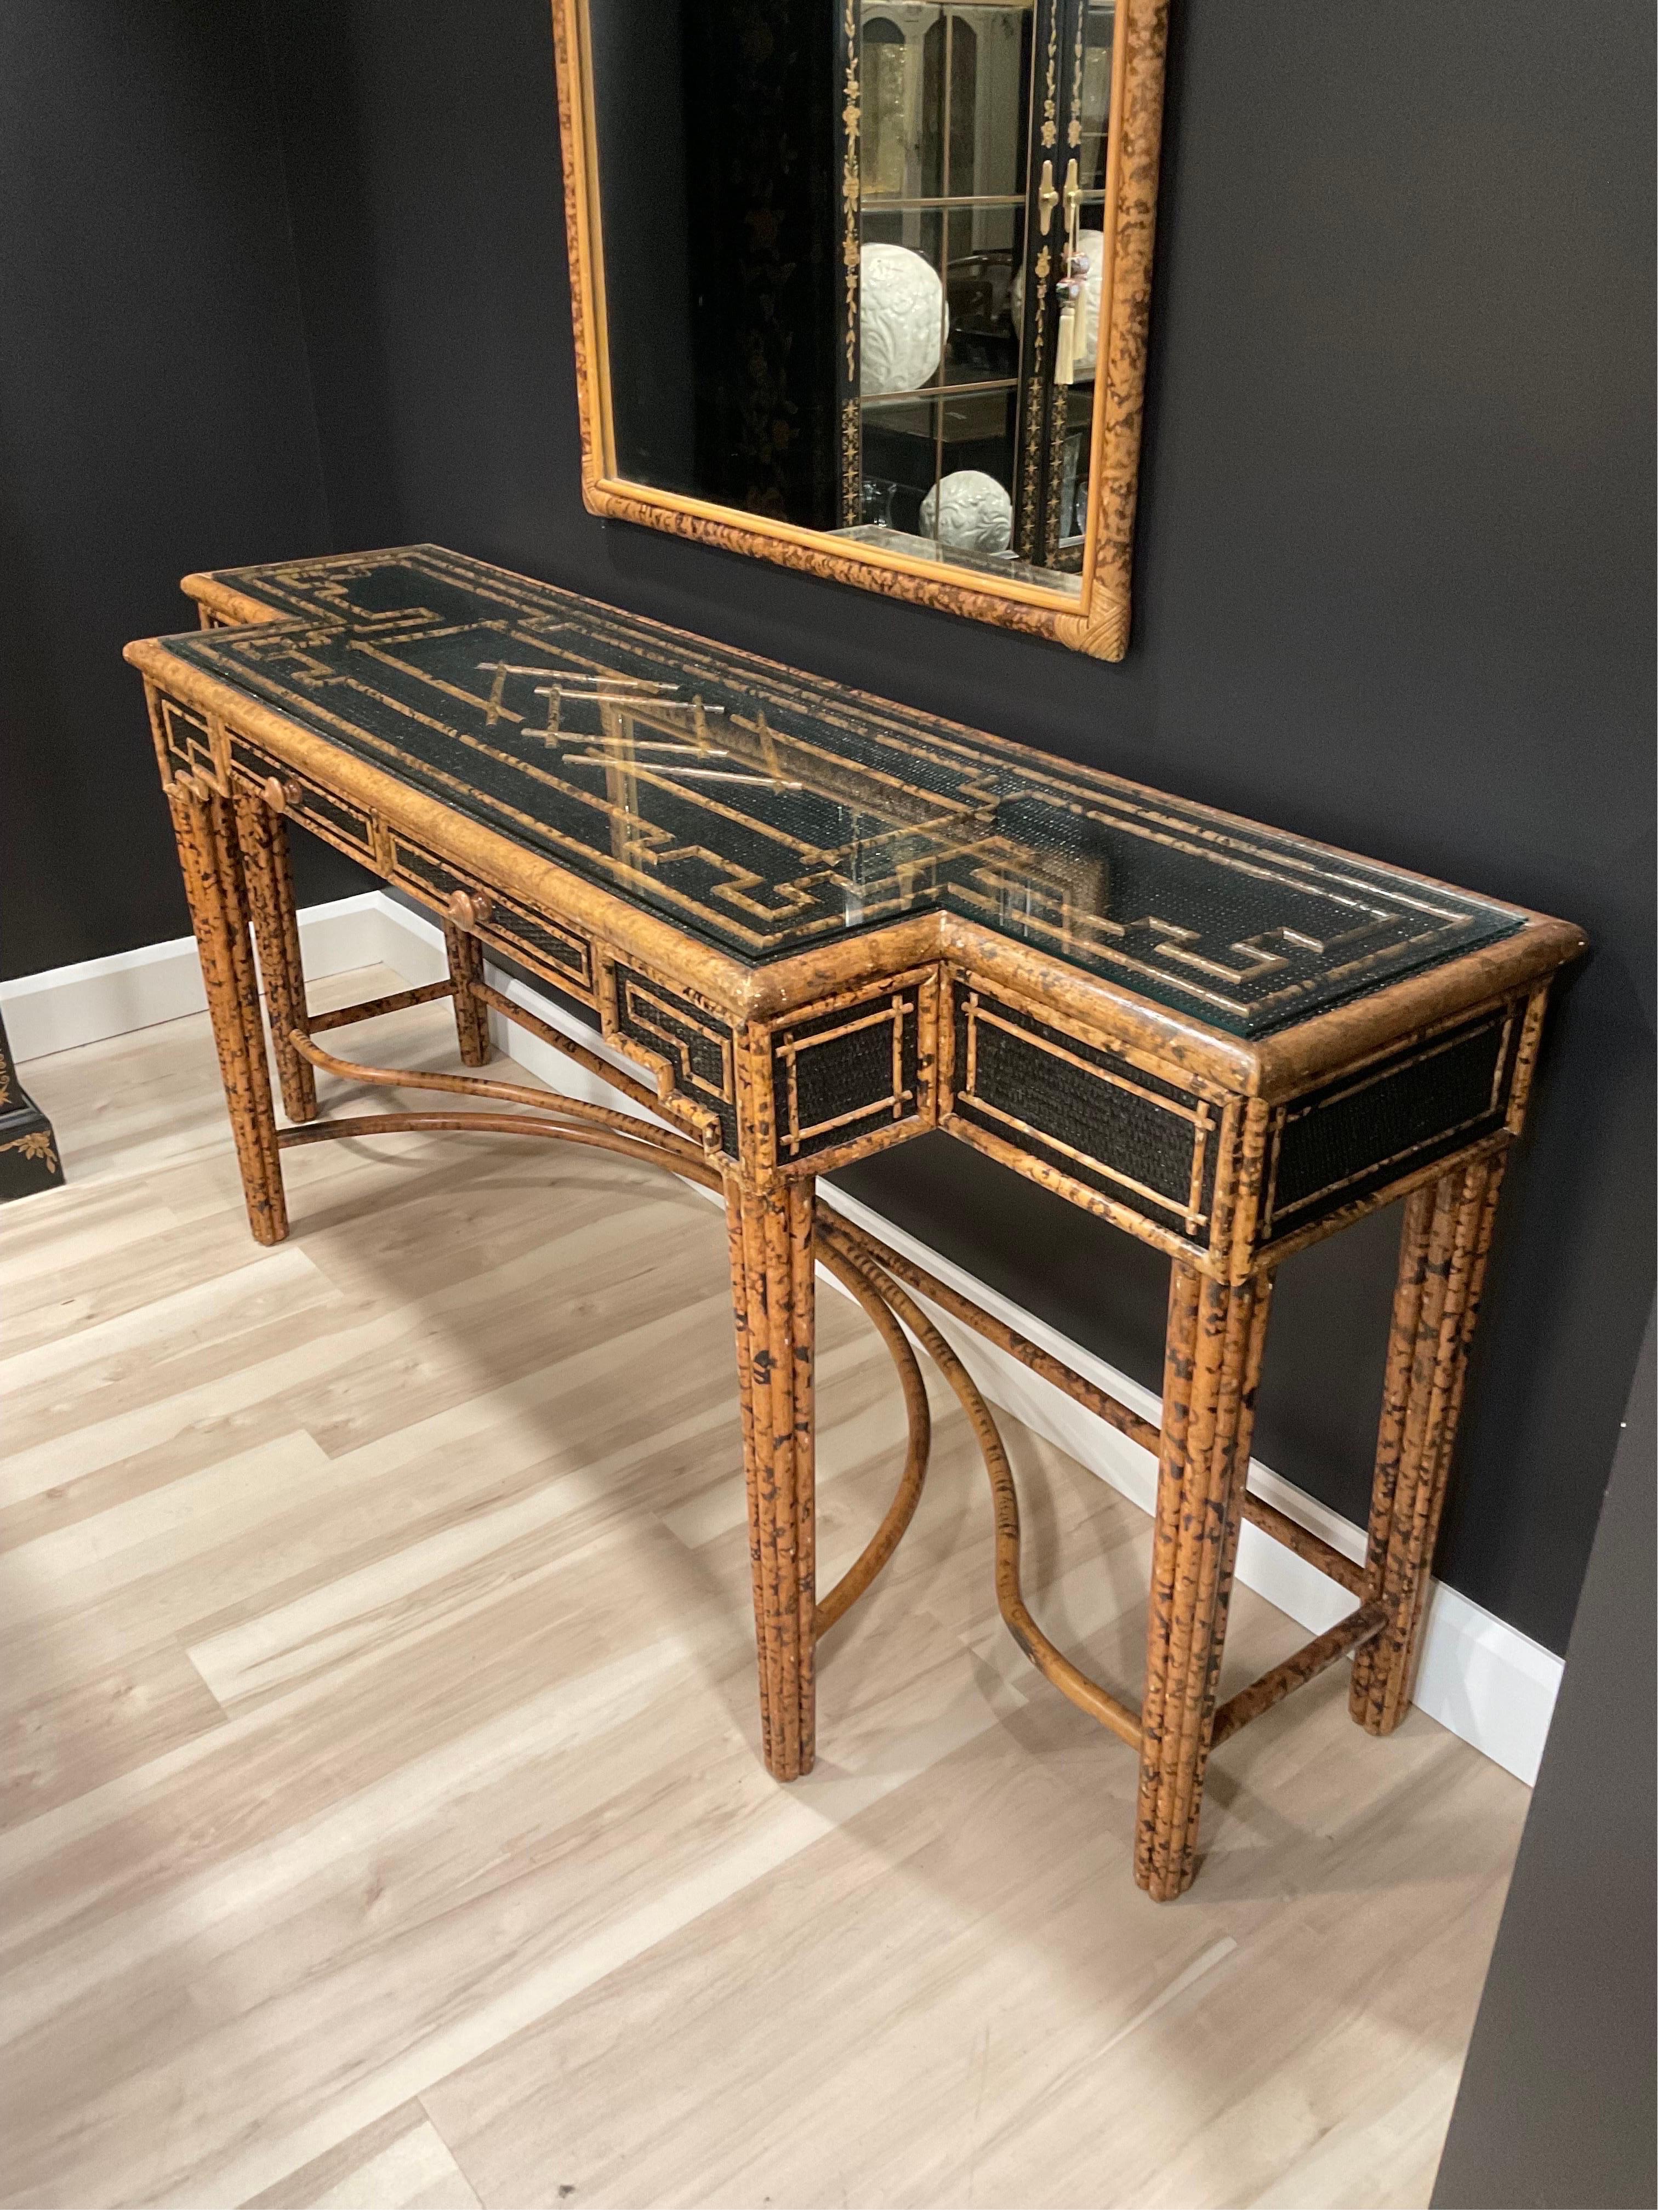 Rare Faux Tortoiseshell painted Ratan and Bamboo Console Table with matching mirrors and custom glass top. Intricate details abound and finished on all four sides. Beautiful pieces.


Condition Disclosure:
Please understand nearly all of our